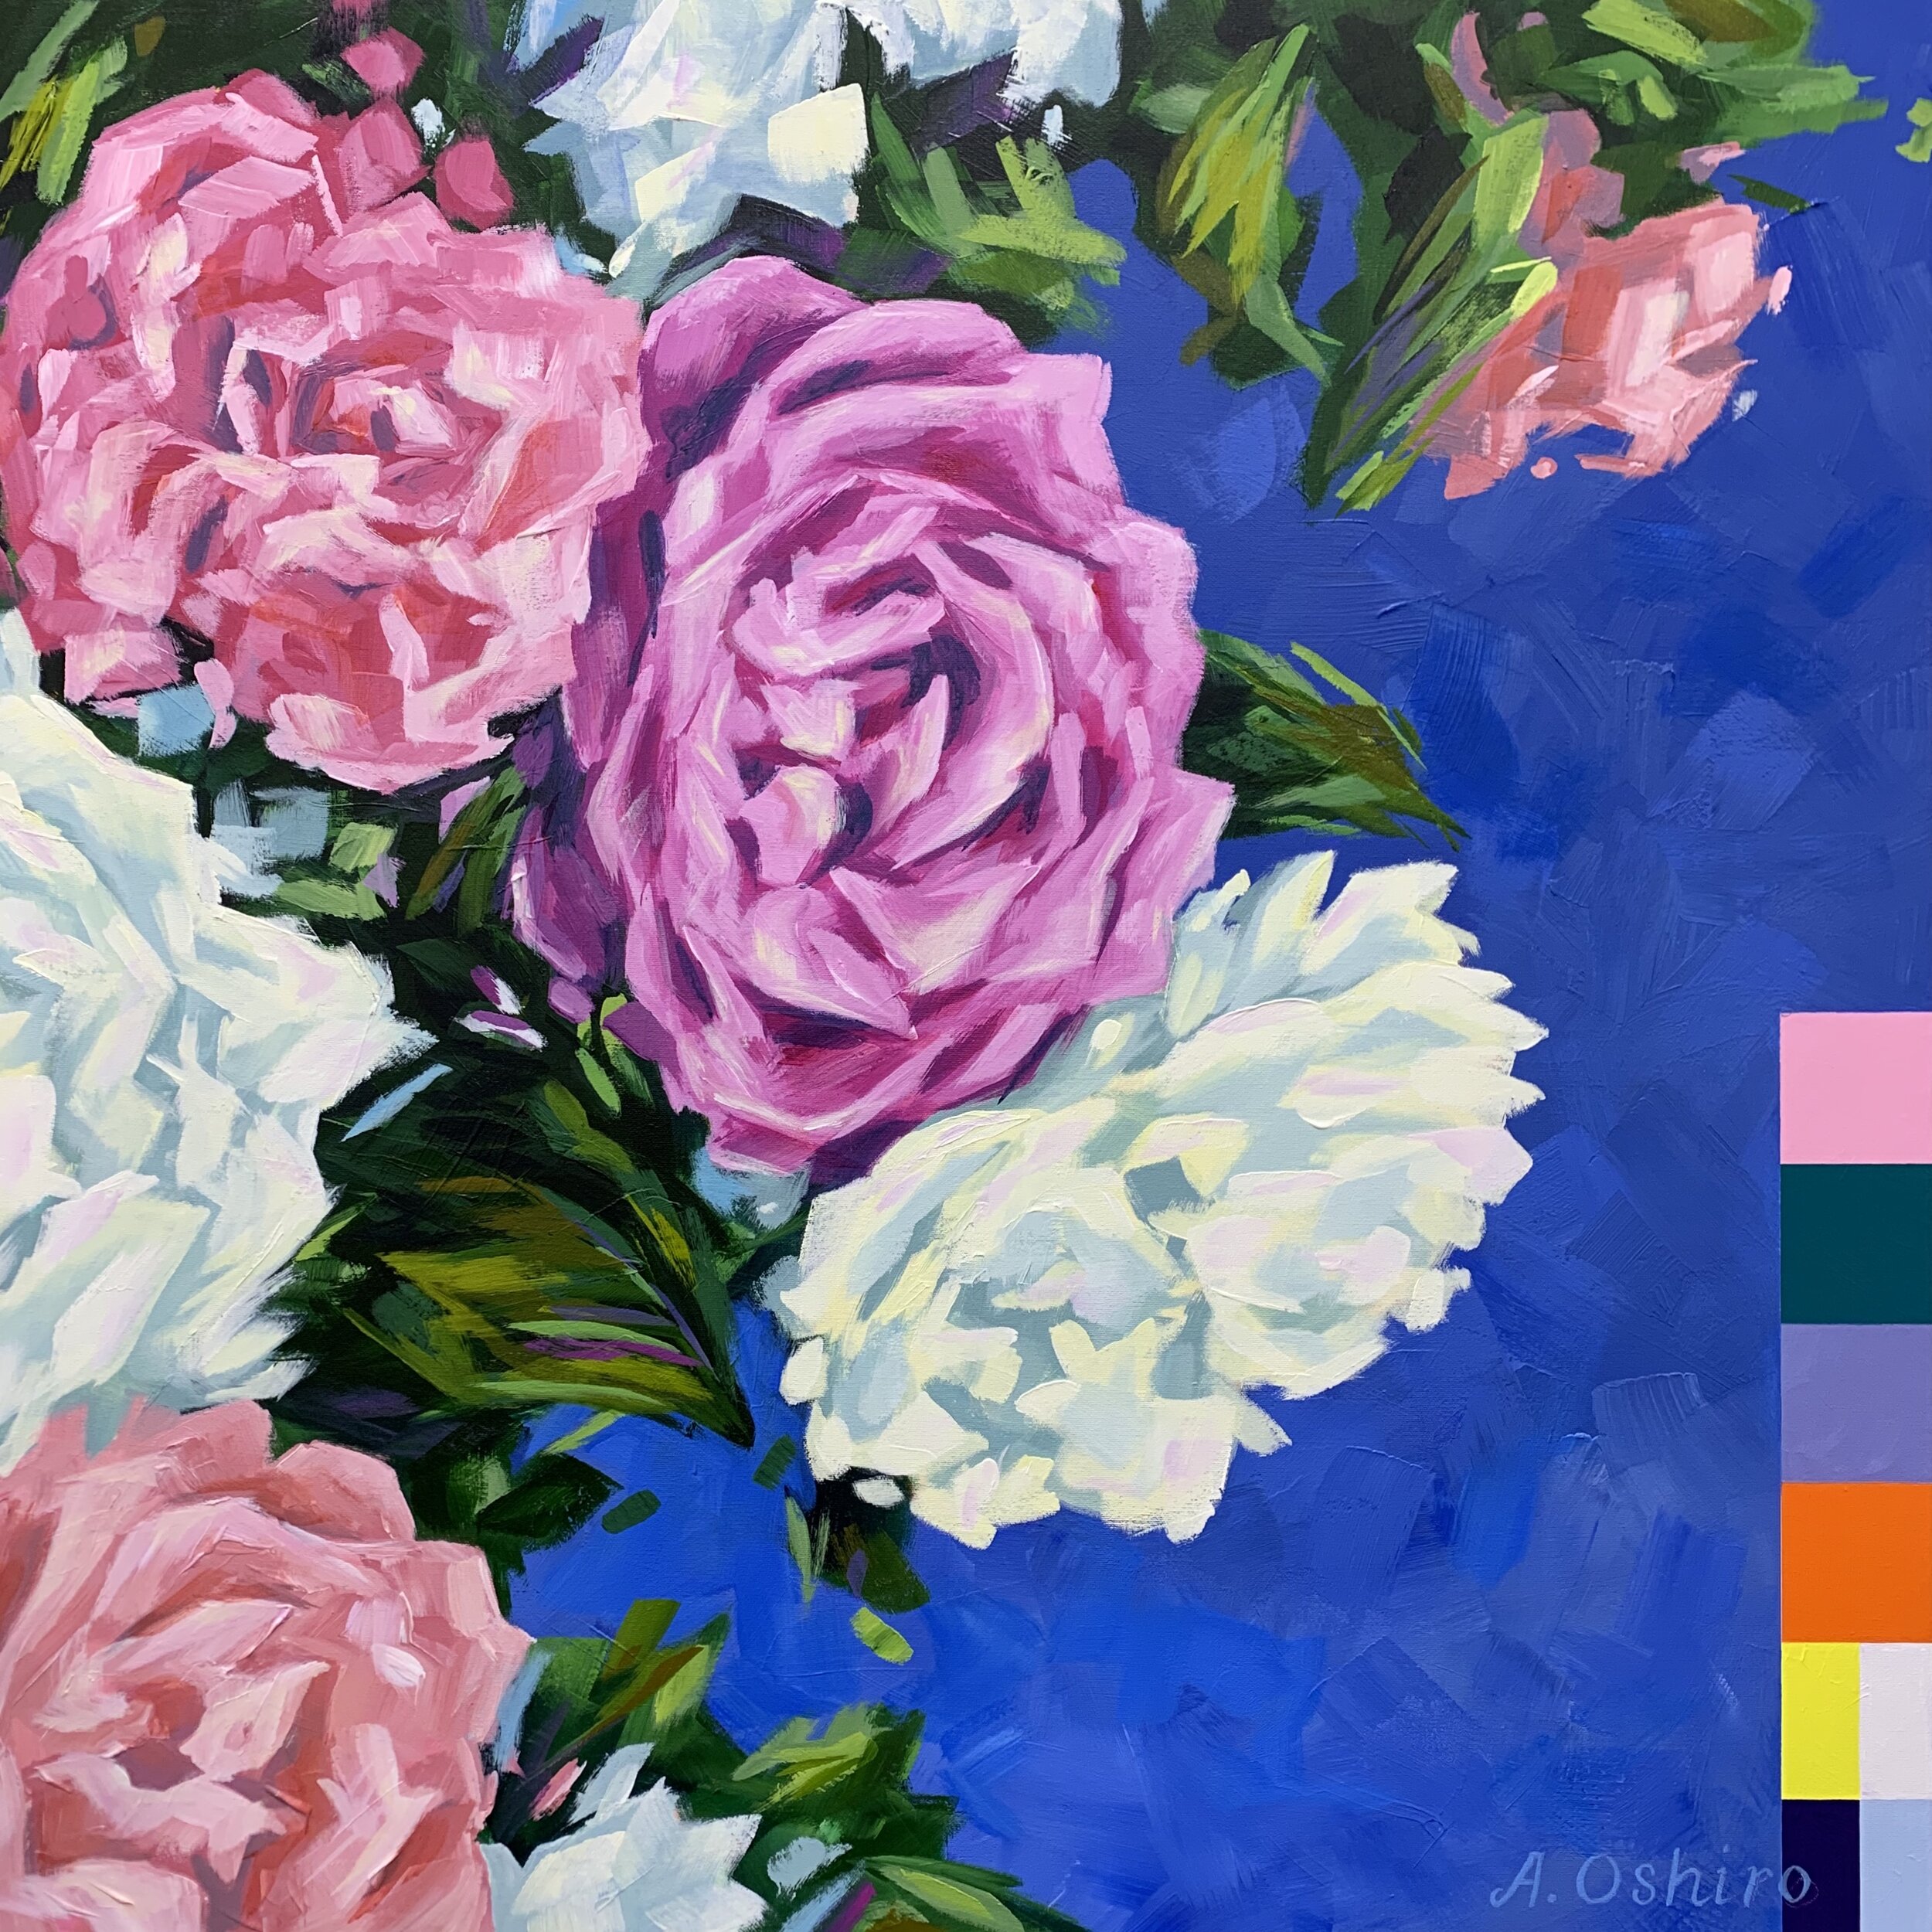 Acrylic Floral Painting of New Order Power and Corruption Cover by Ashley Oshiro, Calgary, Alberta, Local Fine Artist, Original Art